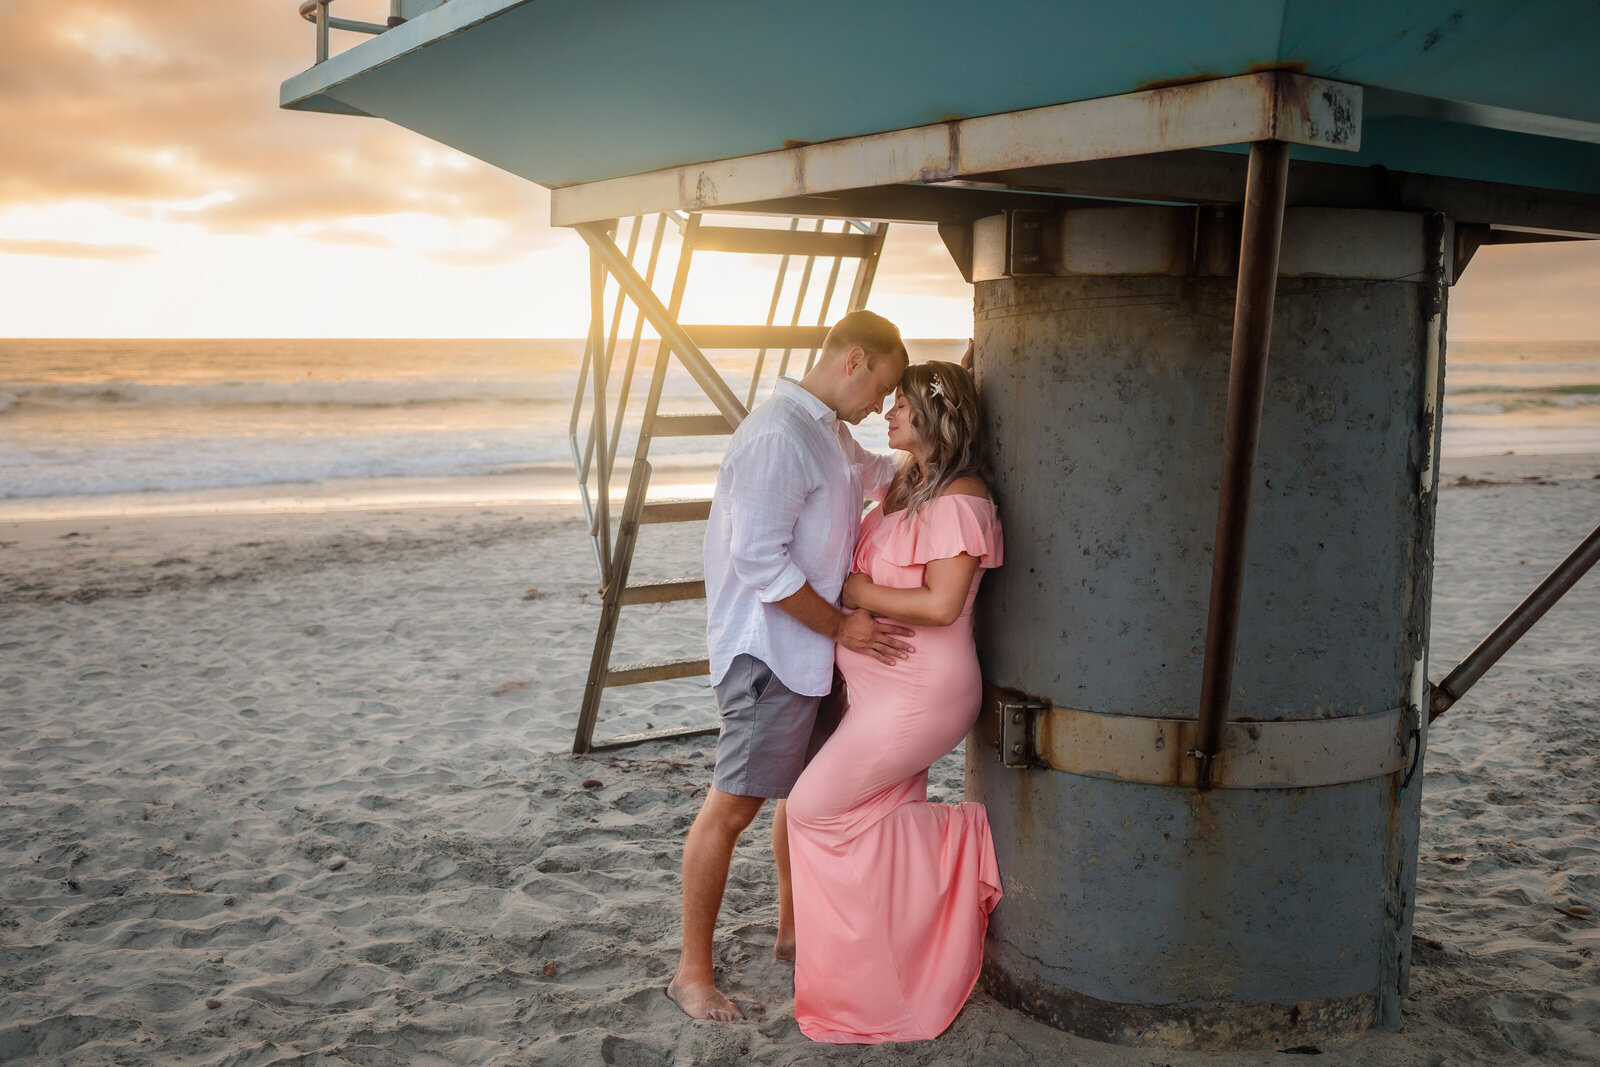 Maternity Photographer, a husband and pregnant wife recline on a lifeguard tower at the beach